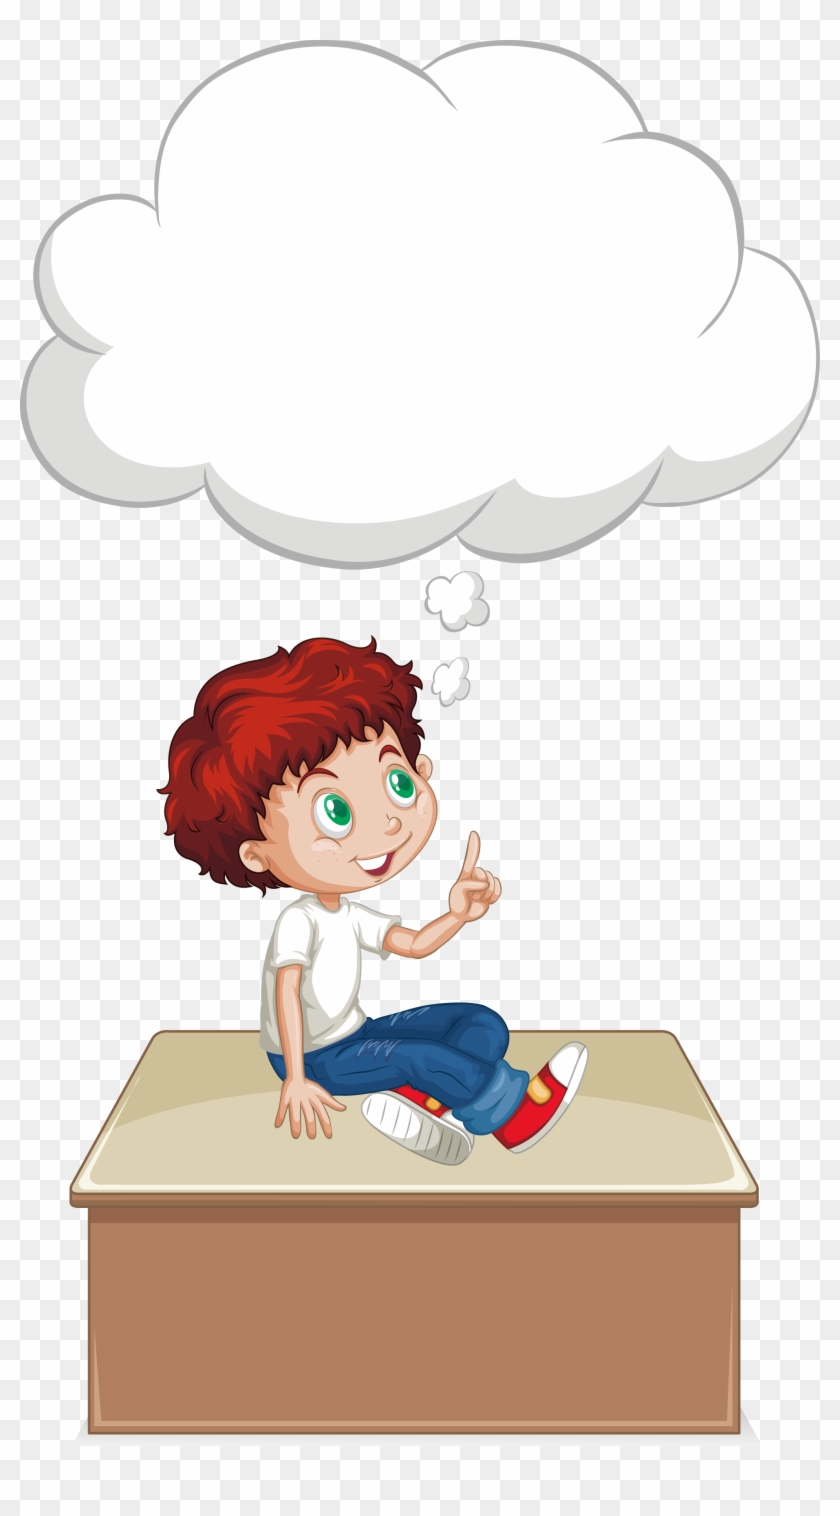 Boy Euclidean Vector Thought Illustration - Boy Thinking Png #1192300